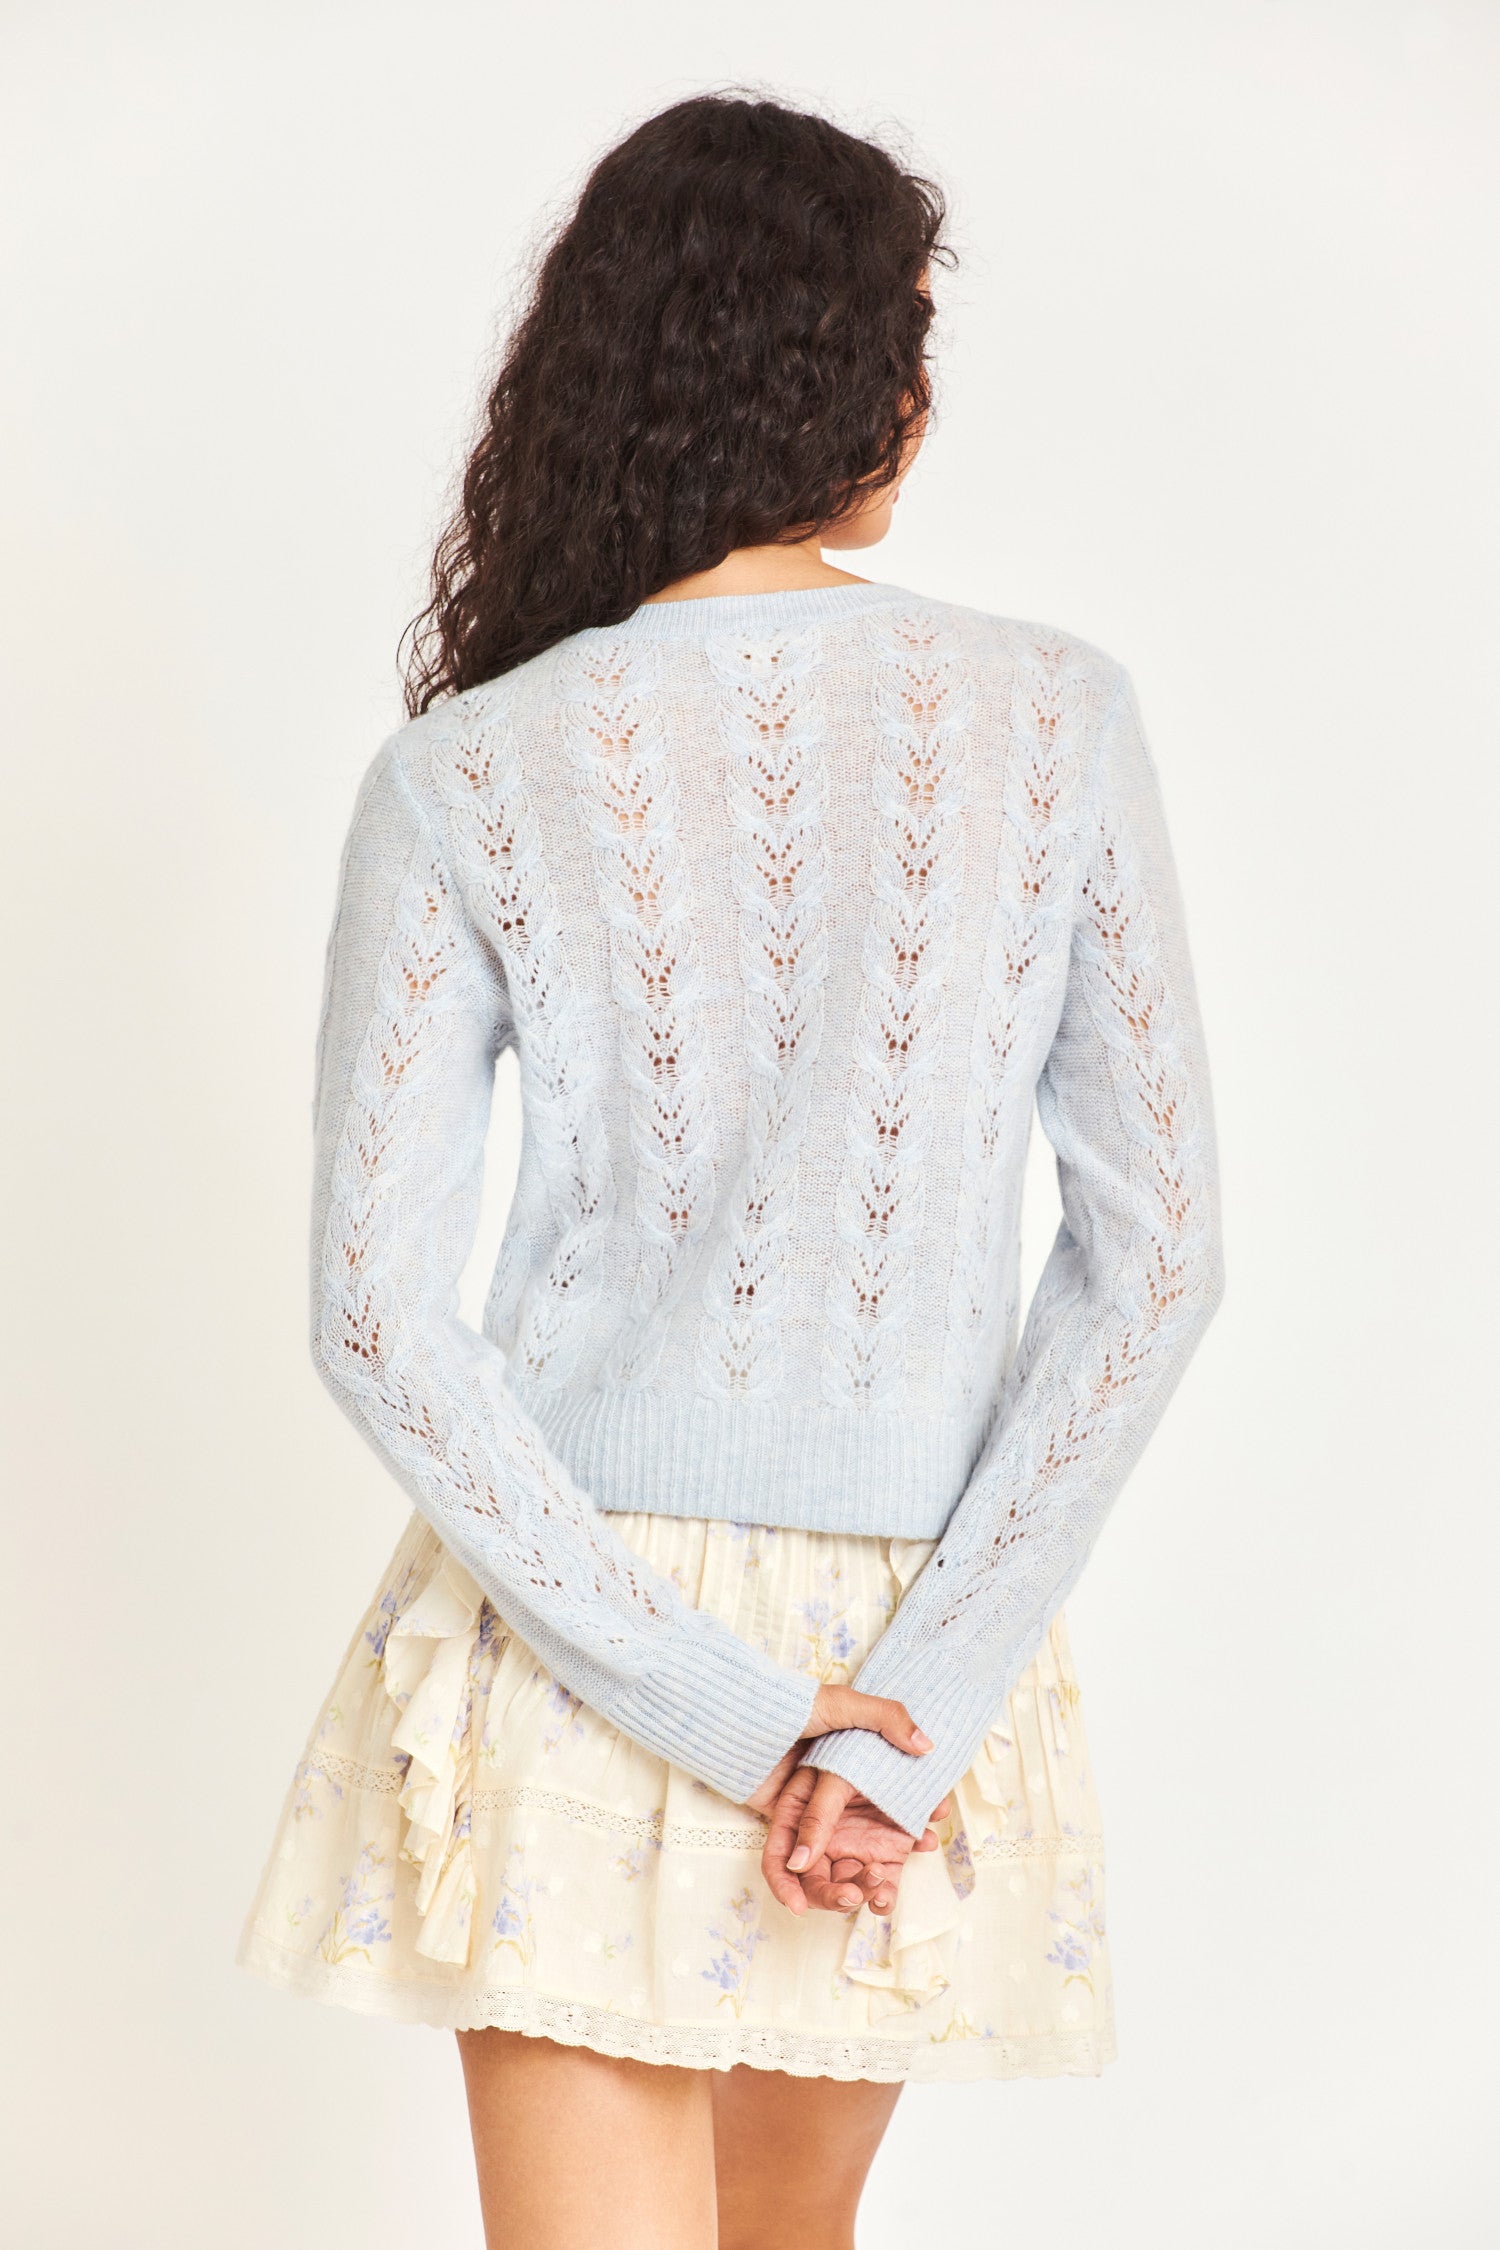 The lightweight baby blue cable knit sweater is a cashmere wool blended sheer fabric with pointelle detailing and a hand embellished neckline with crystals and clusters of iridescent pearls. 